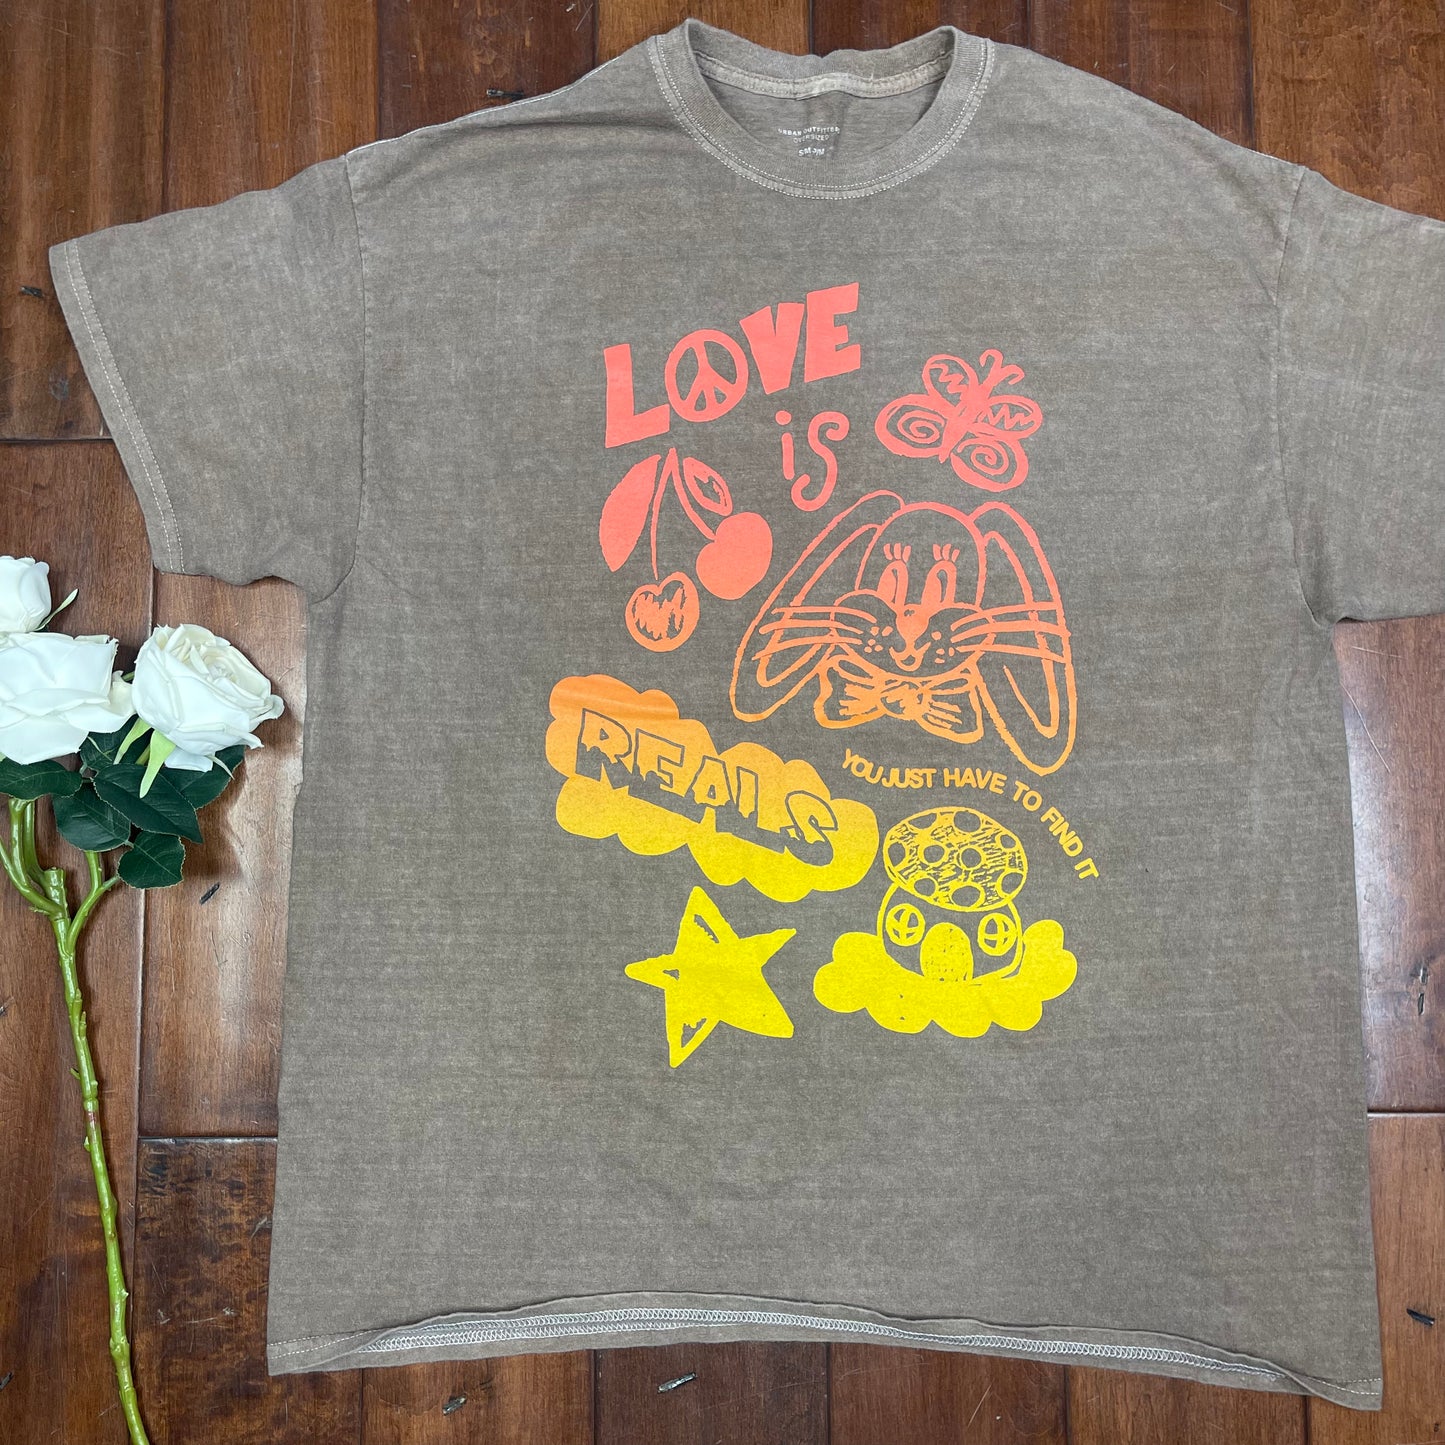 THRIFTED UO “LOVE IS” BOX T-SHIRT